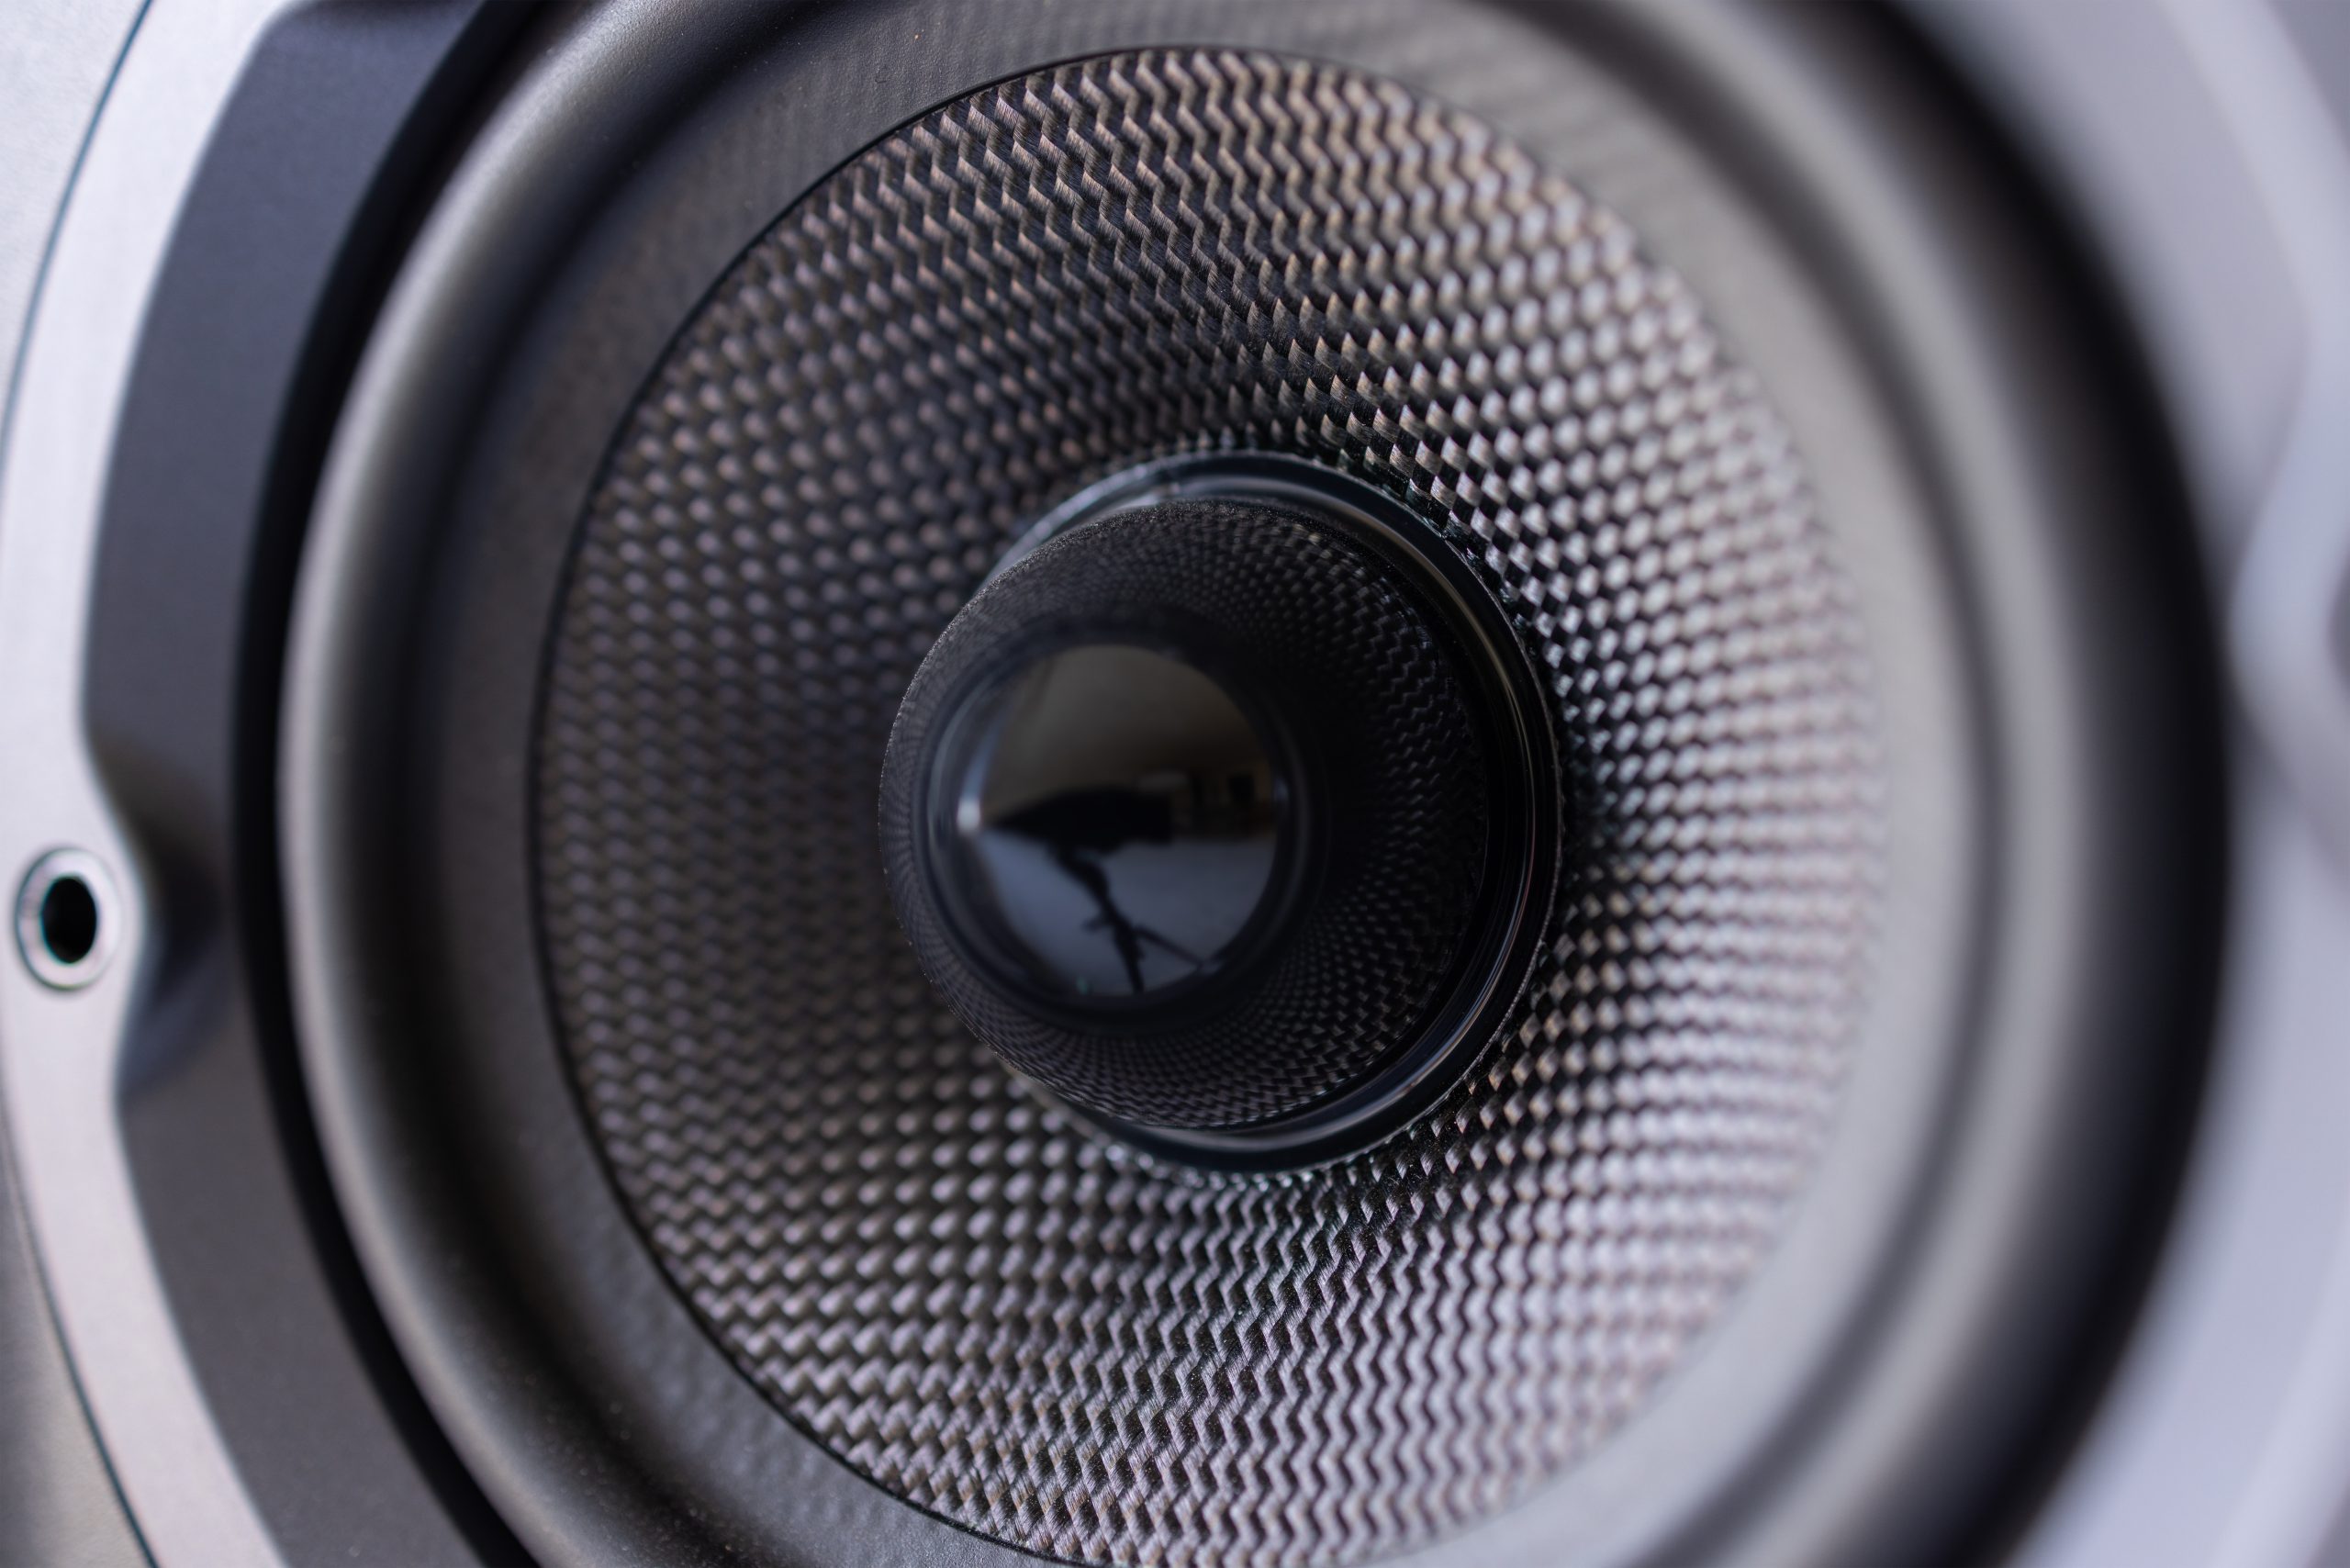 What are "Parametric" and "Ultrasound" speakers and how do they operate?